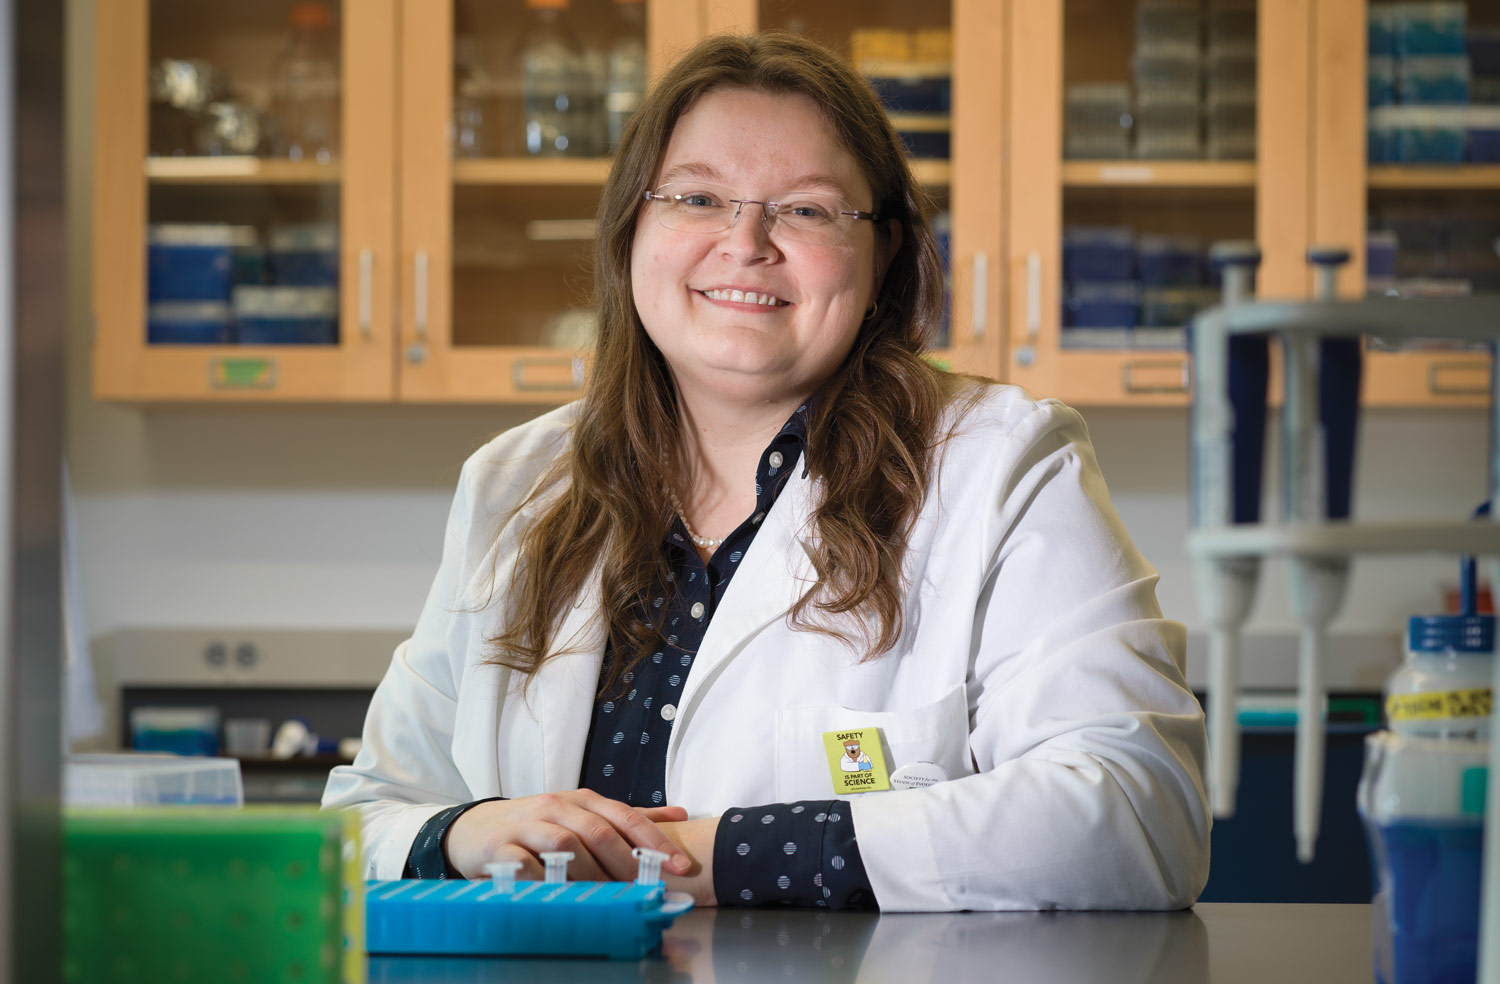 Megan Phifer-Rixey wearing a lab coat and smiling while standing in a lab